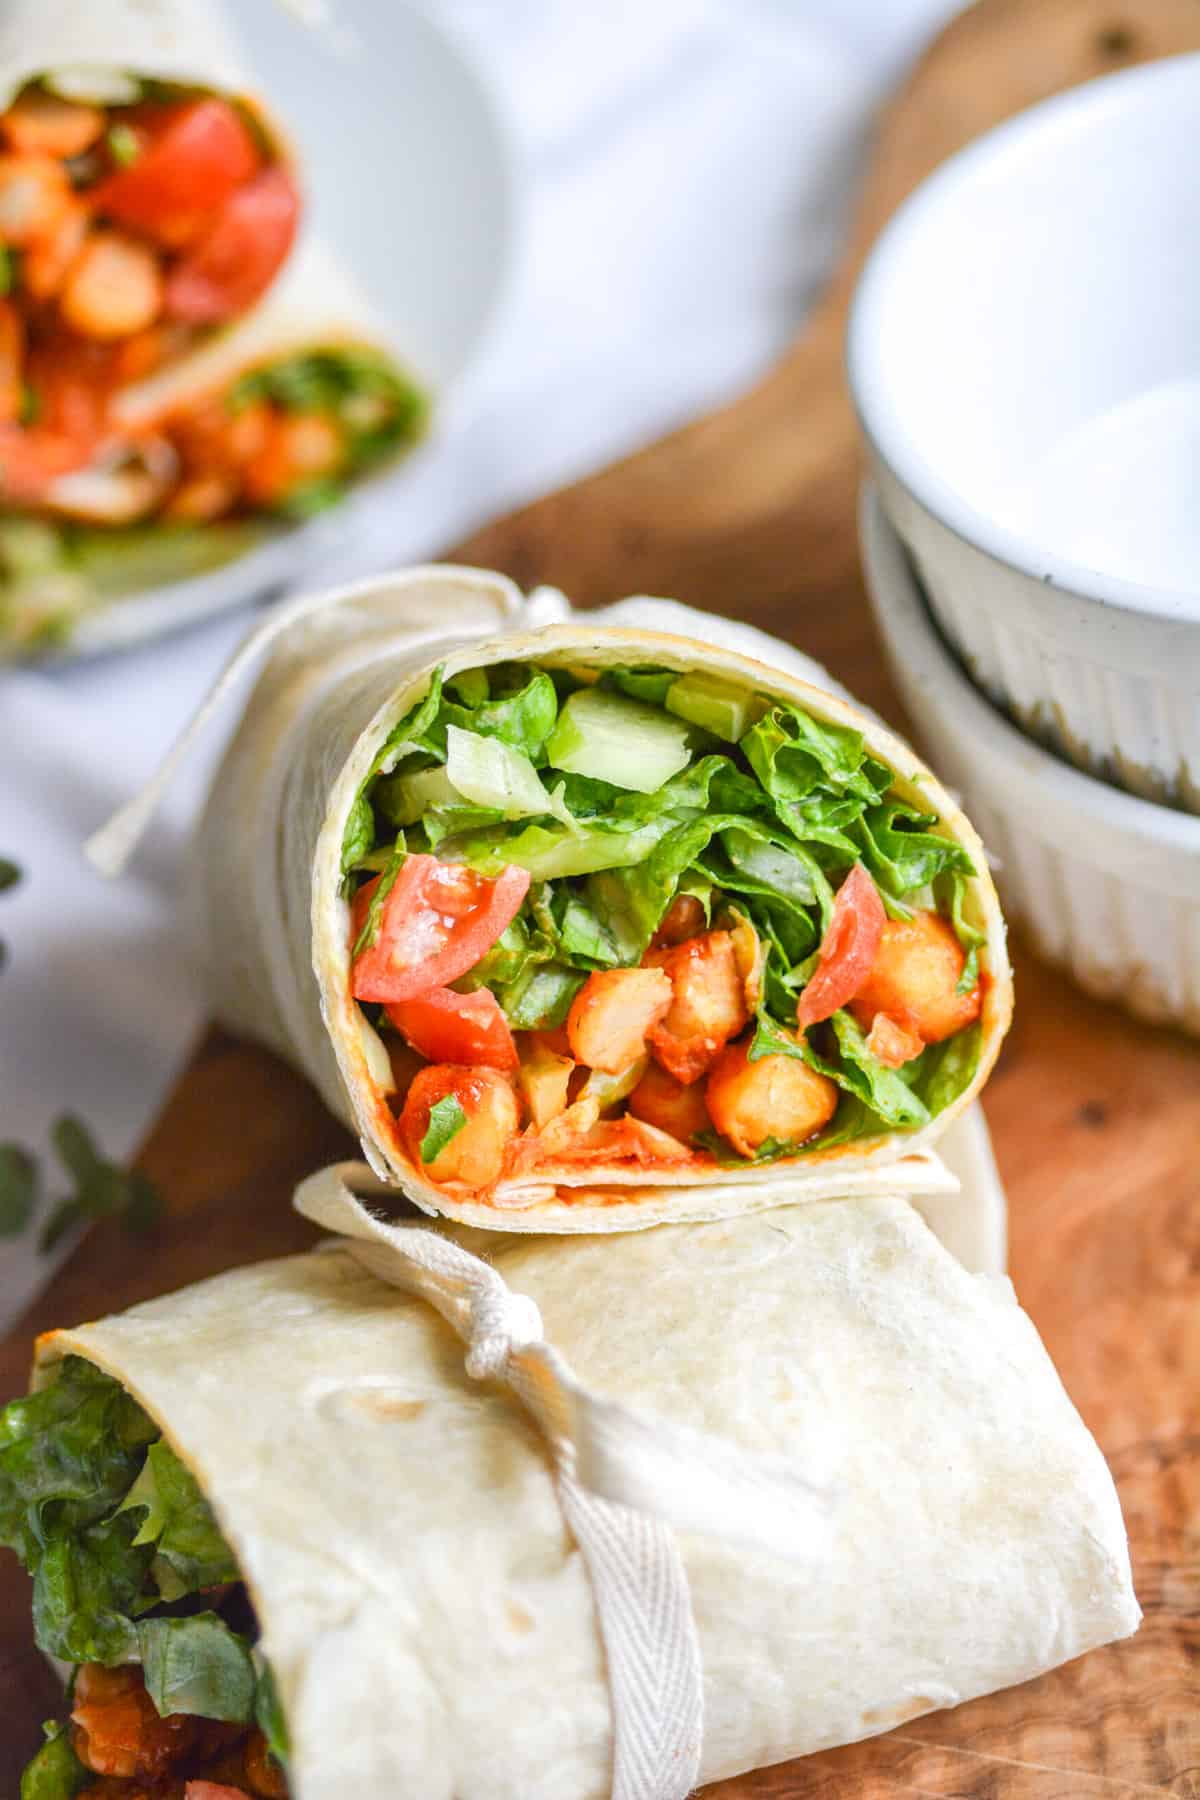 A Vegan Buffalo Chickpea Wrap cut in half to show the inside, resting on another wrap.